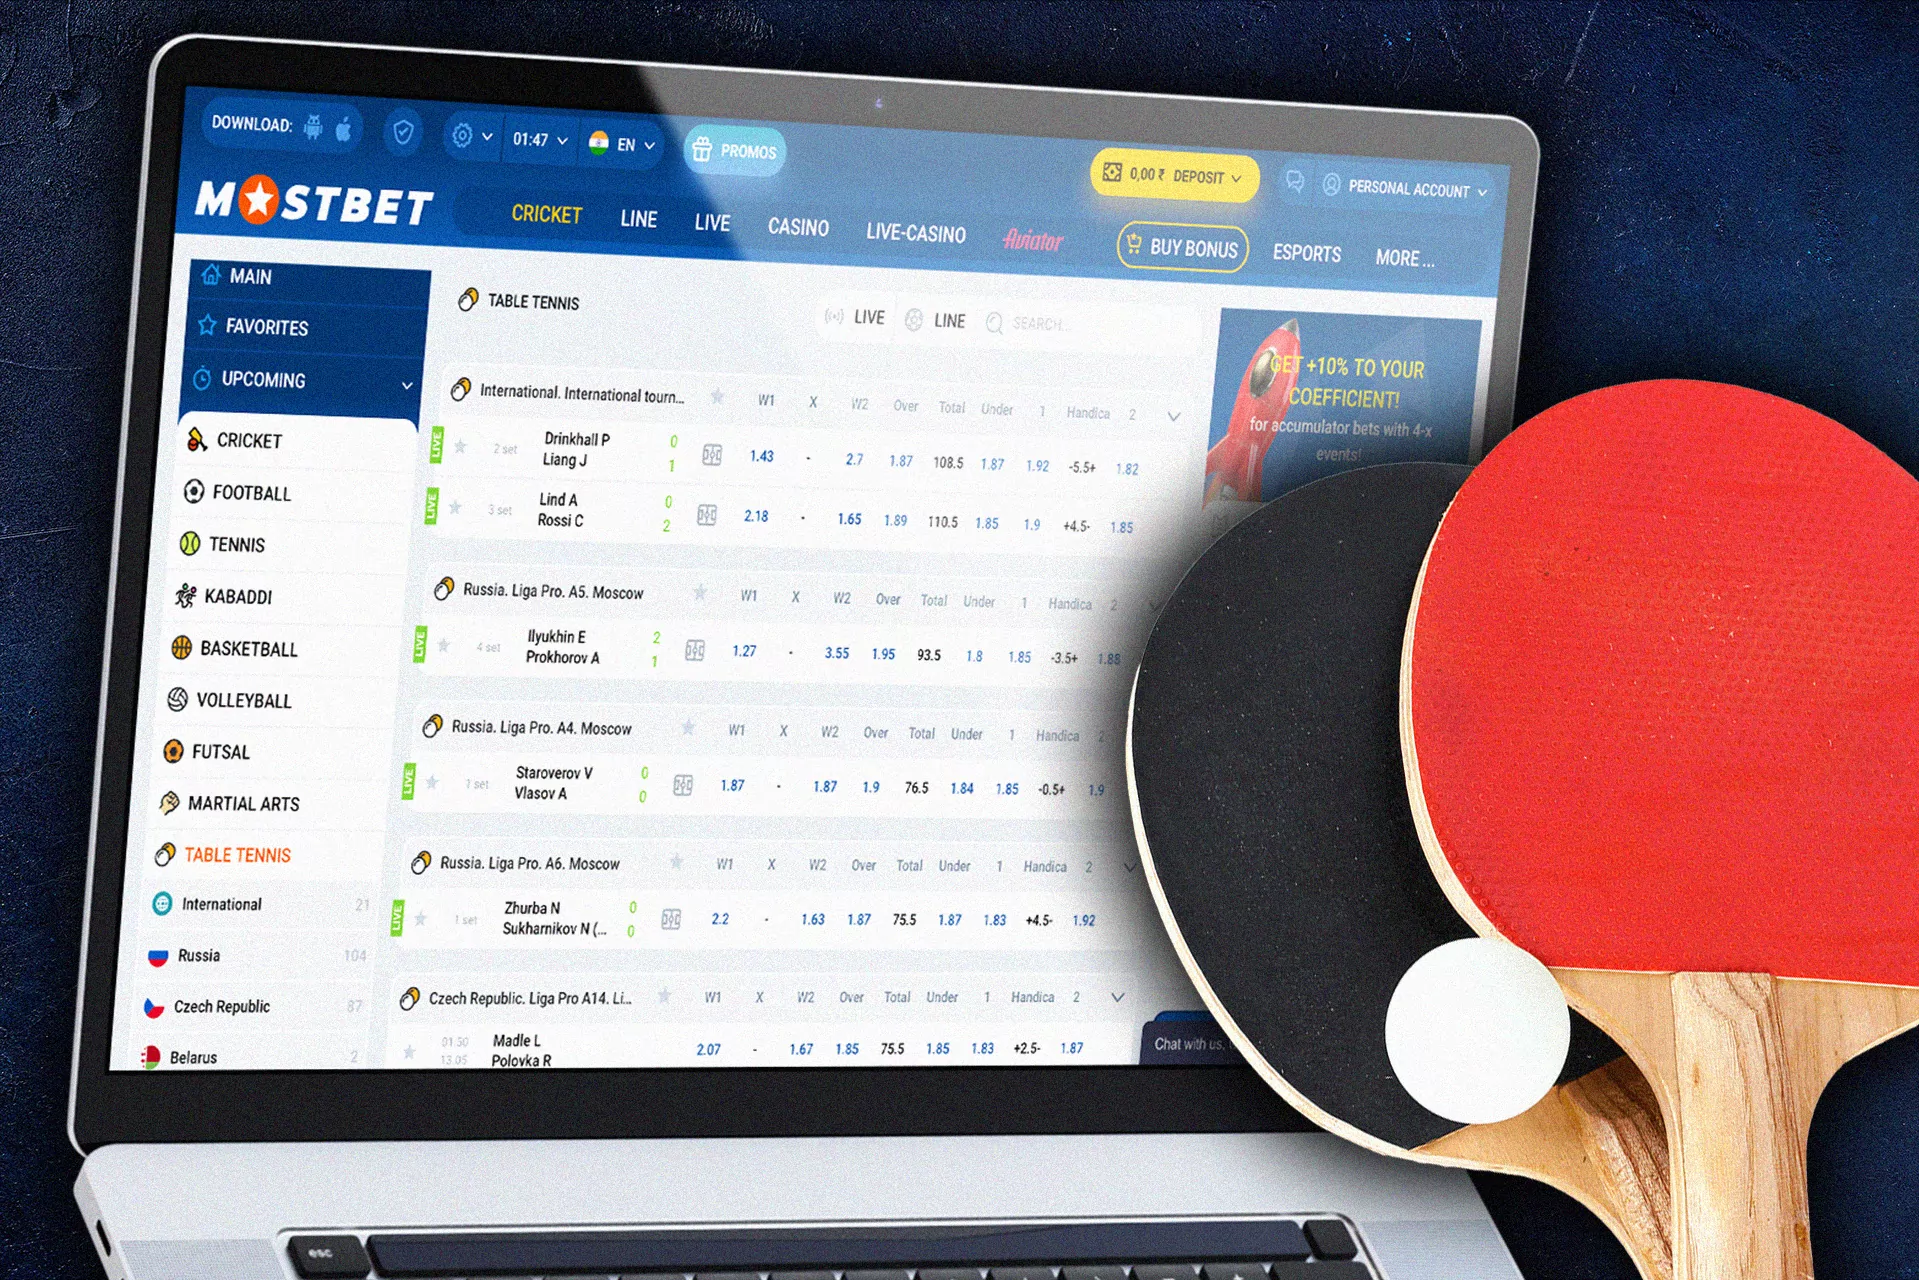 Table tennis betting is also there to bet on.